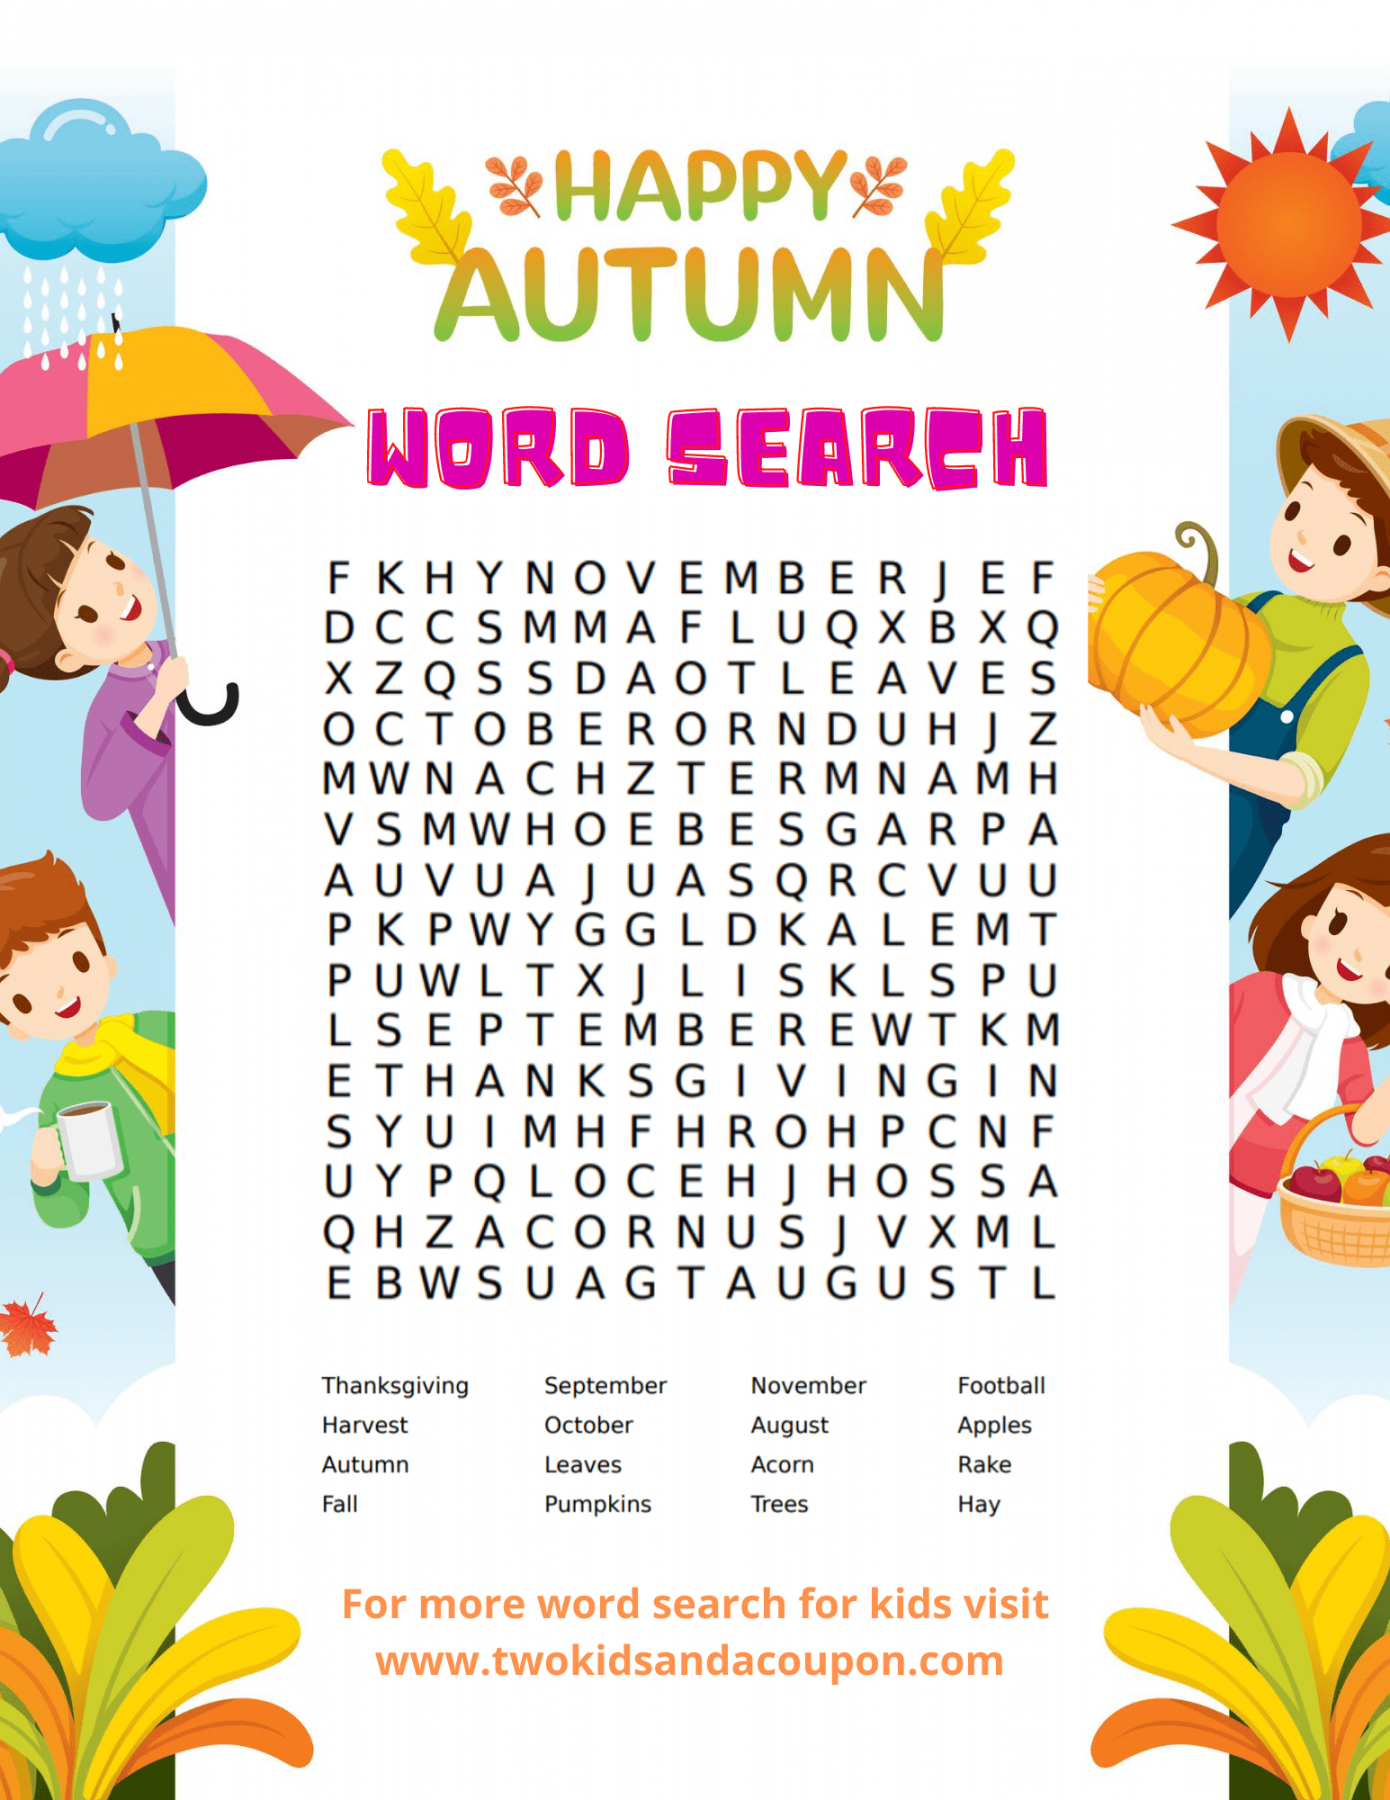 Free Printable Word Searches For Kids - Printable - Free Kids Word Search Puzzles Printable for Fall for Your Family